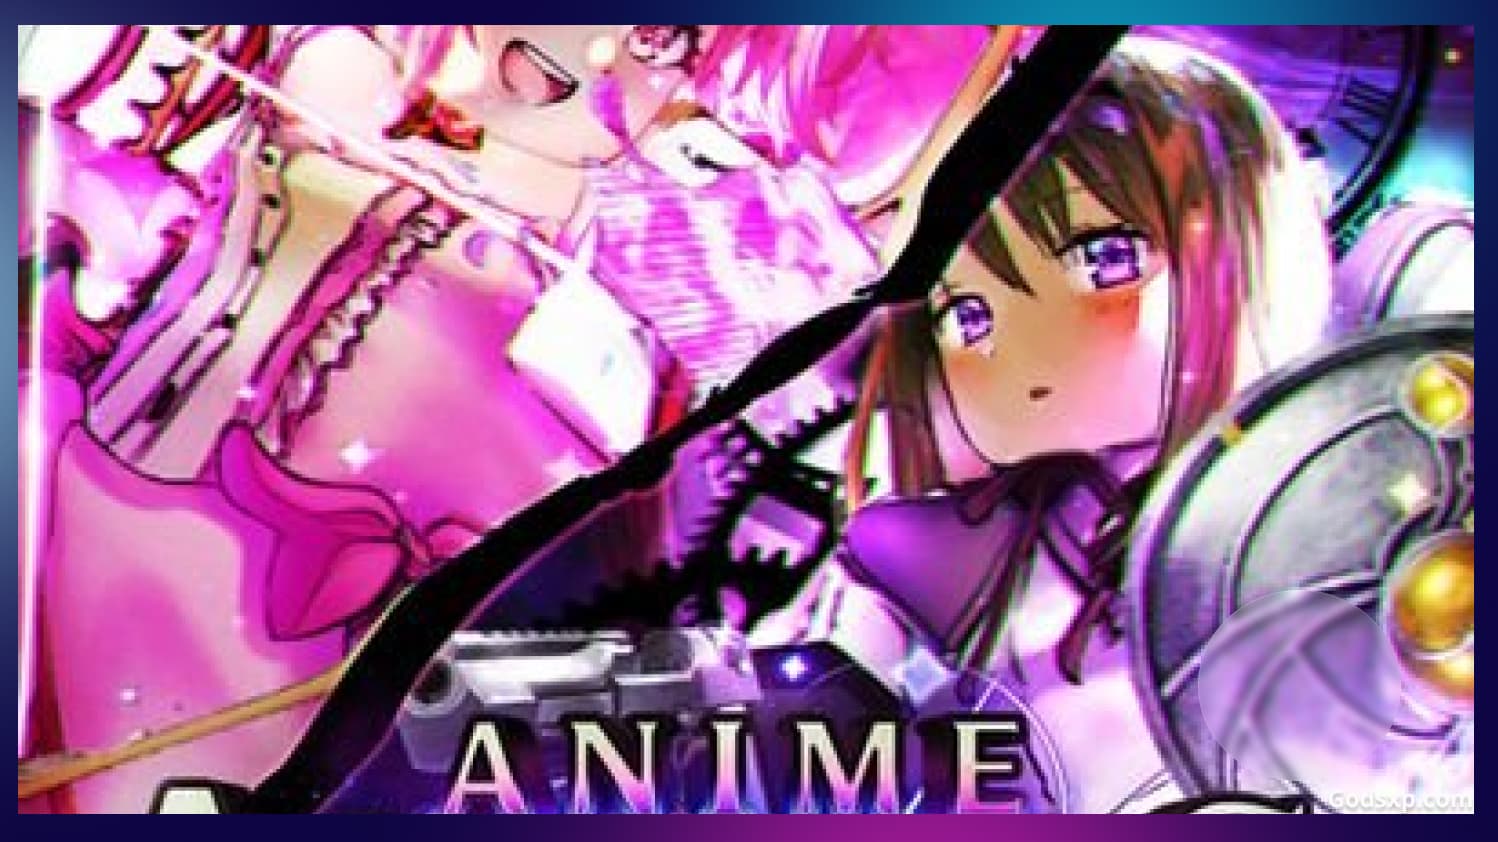 Anime Adventures on X: ✨ Update 12 has been Released! 🦸‍♂️ New World:  Hero City! Use Code: VIGILANTE For Free Gems! #Roblox #AnimeAdventures   / X